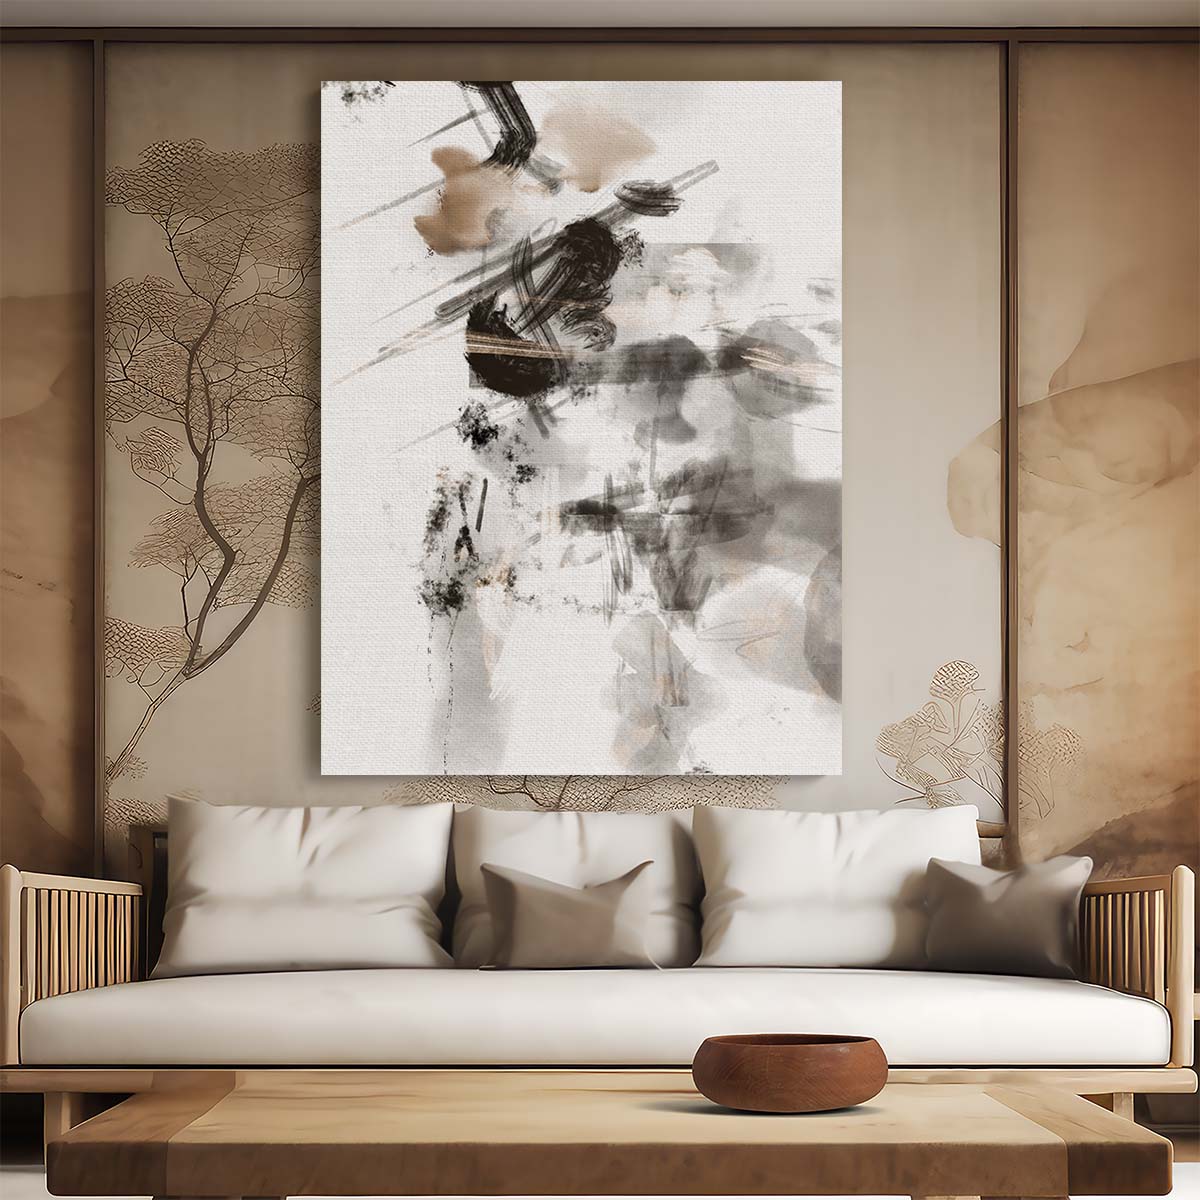 Abstract Geometric Illustration Beige Black Color Splash Painting by Luxuriance Designs, made in USA